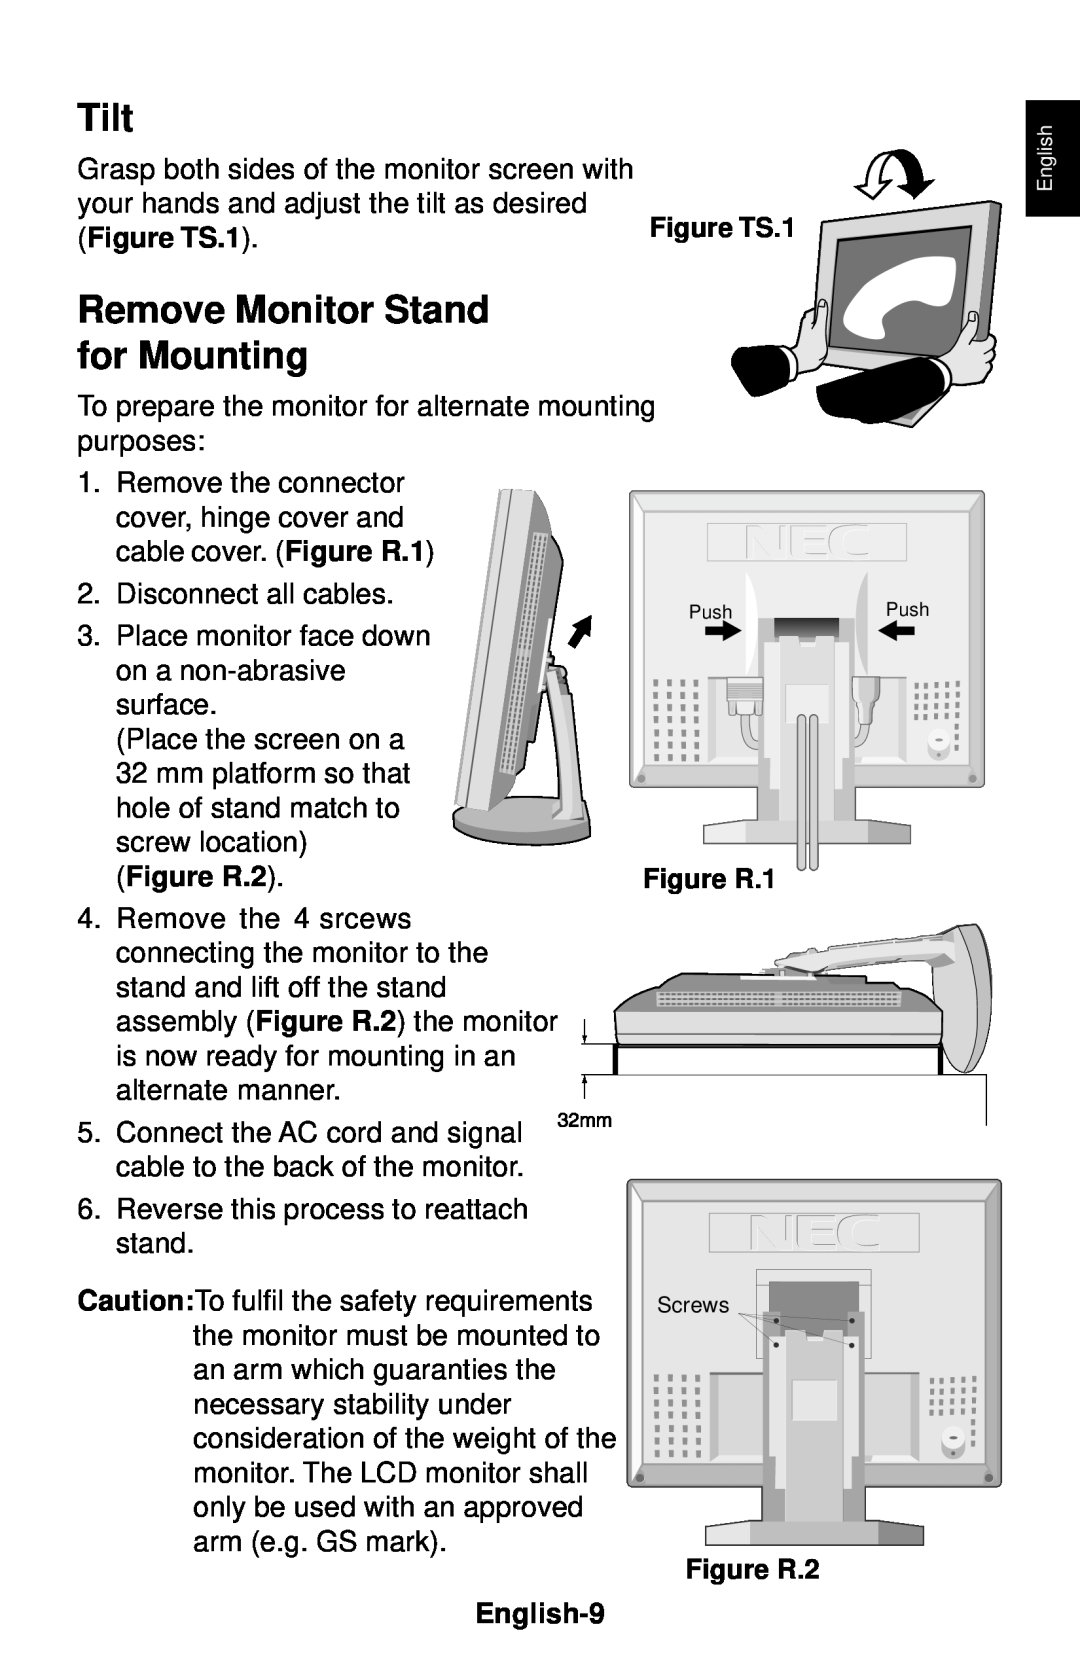 NEC LCD1830 user manual Tilt, Remove Monitor Stand for Mounting, Figure TS.1, Figure R.2, English-9 